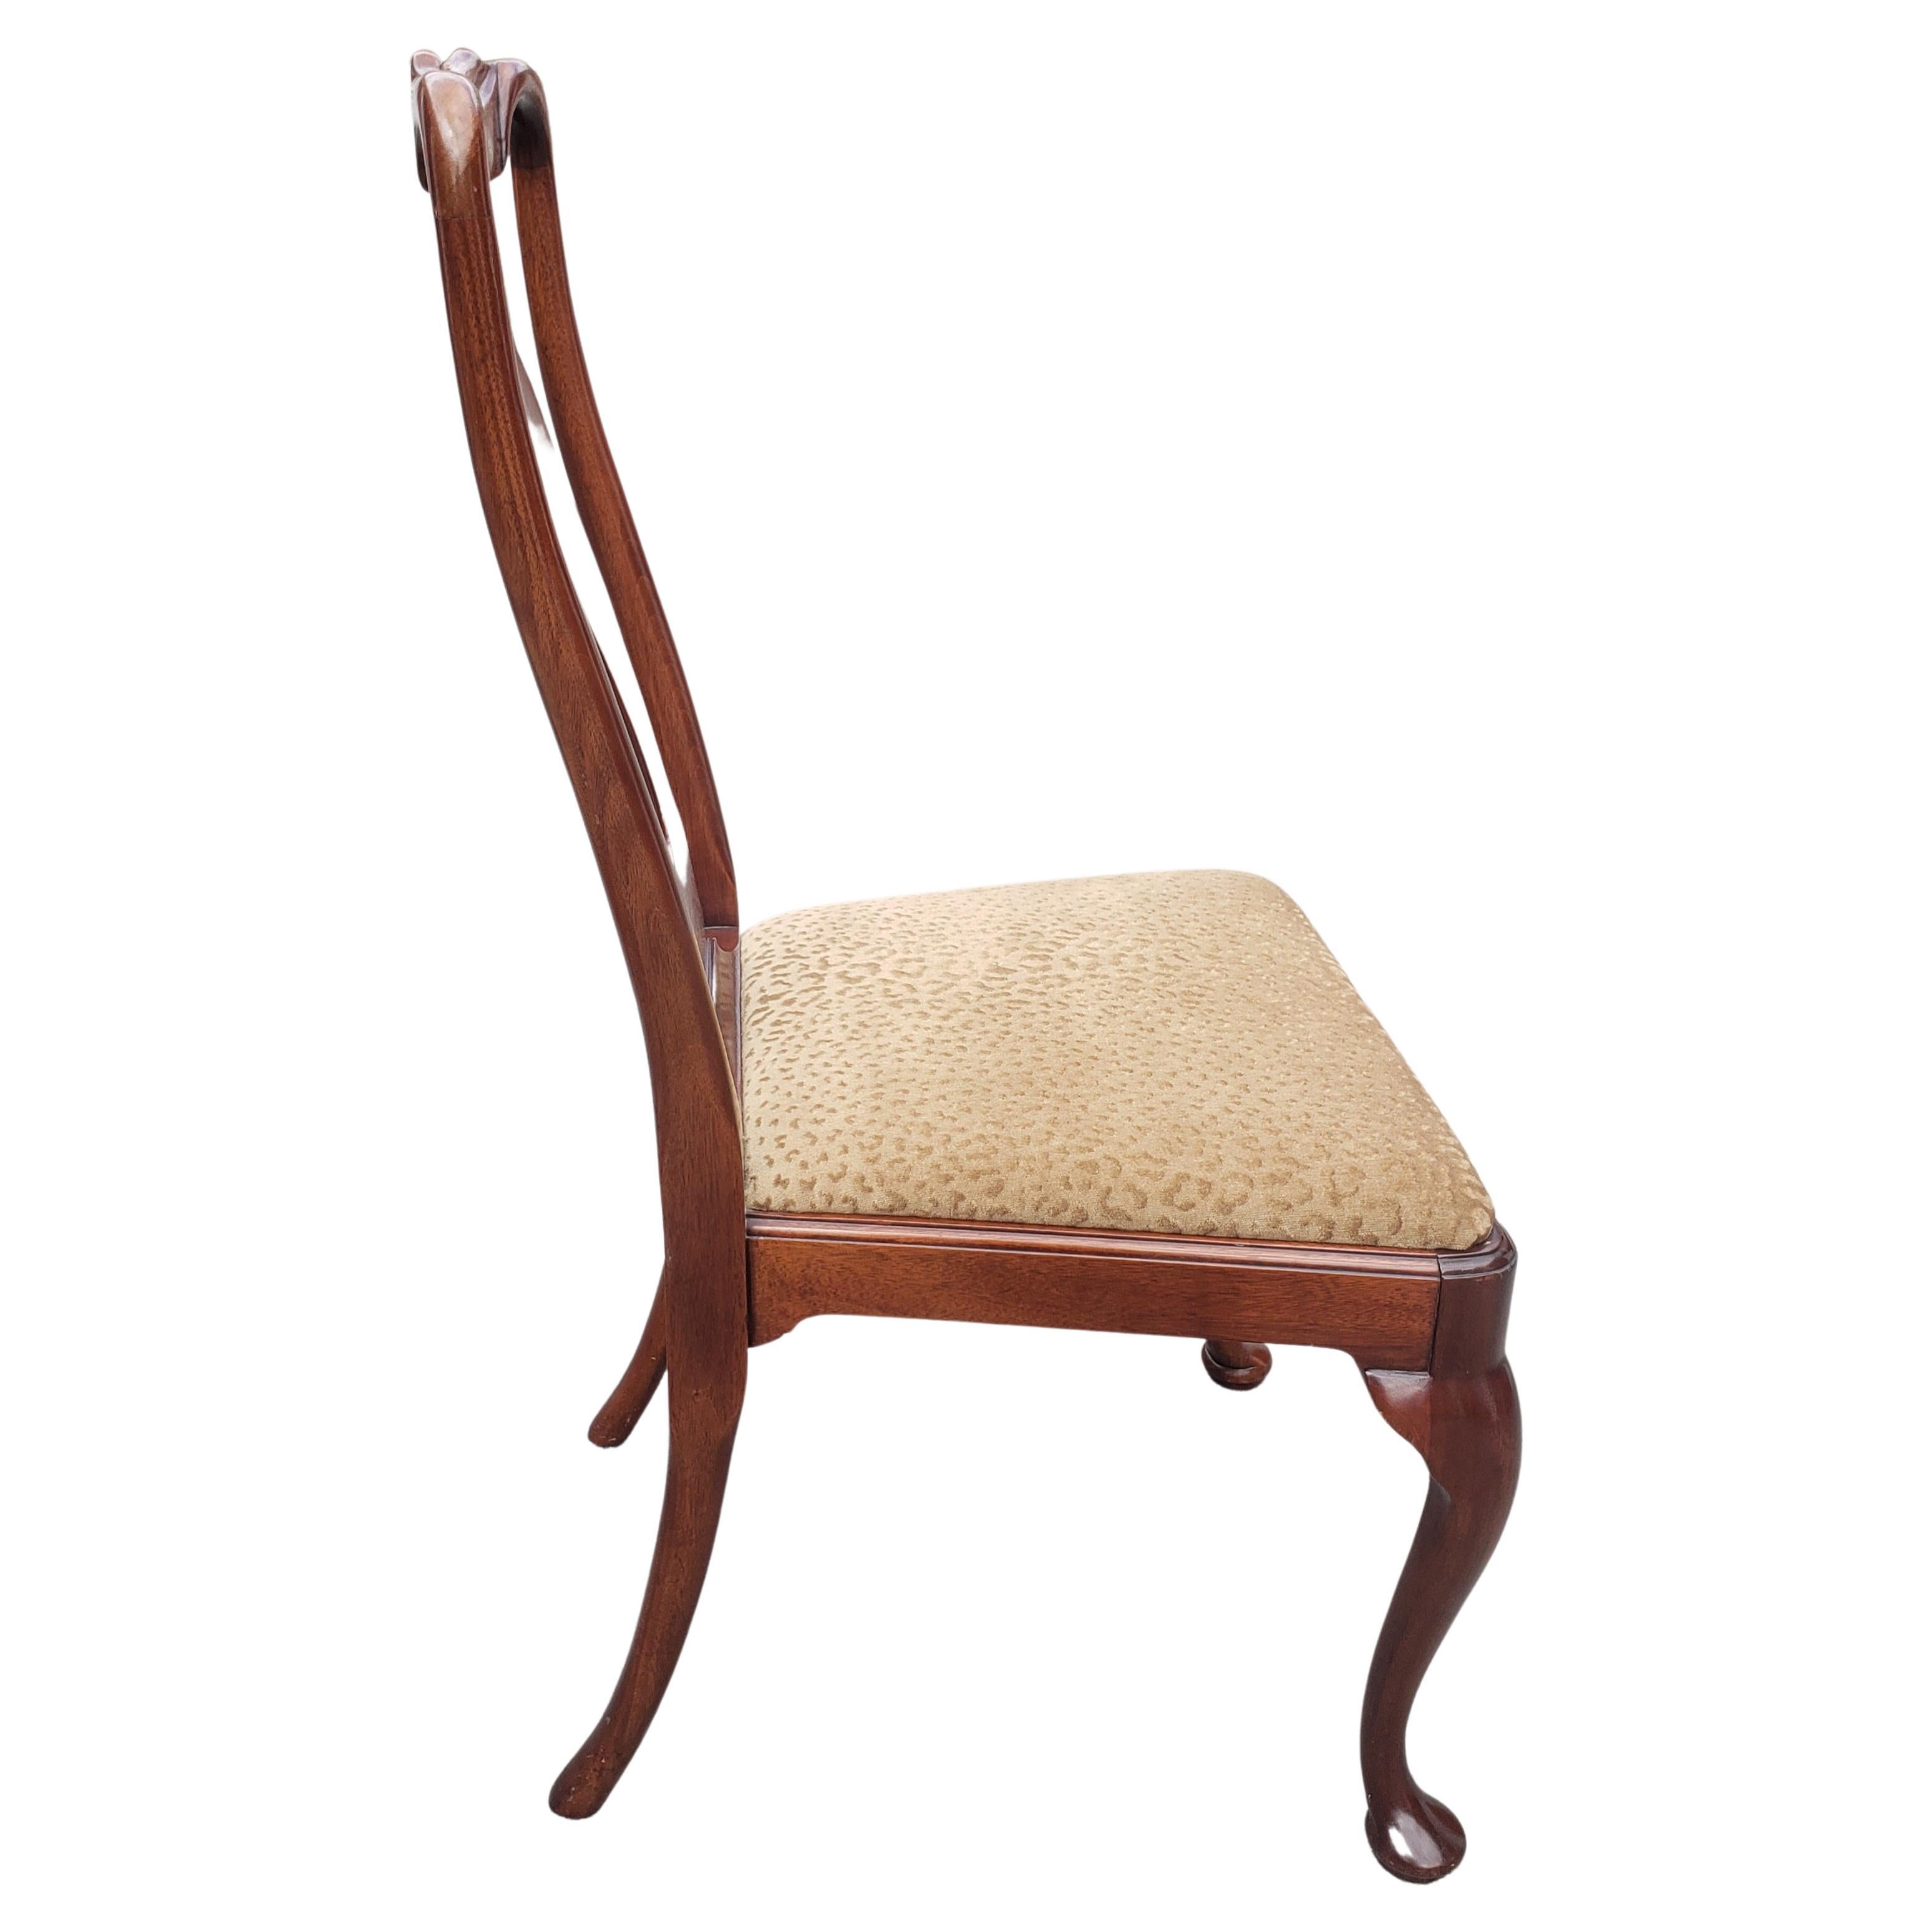 American Hickory Chair Queen Anne Mahogany Dinning Chairs, A Set